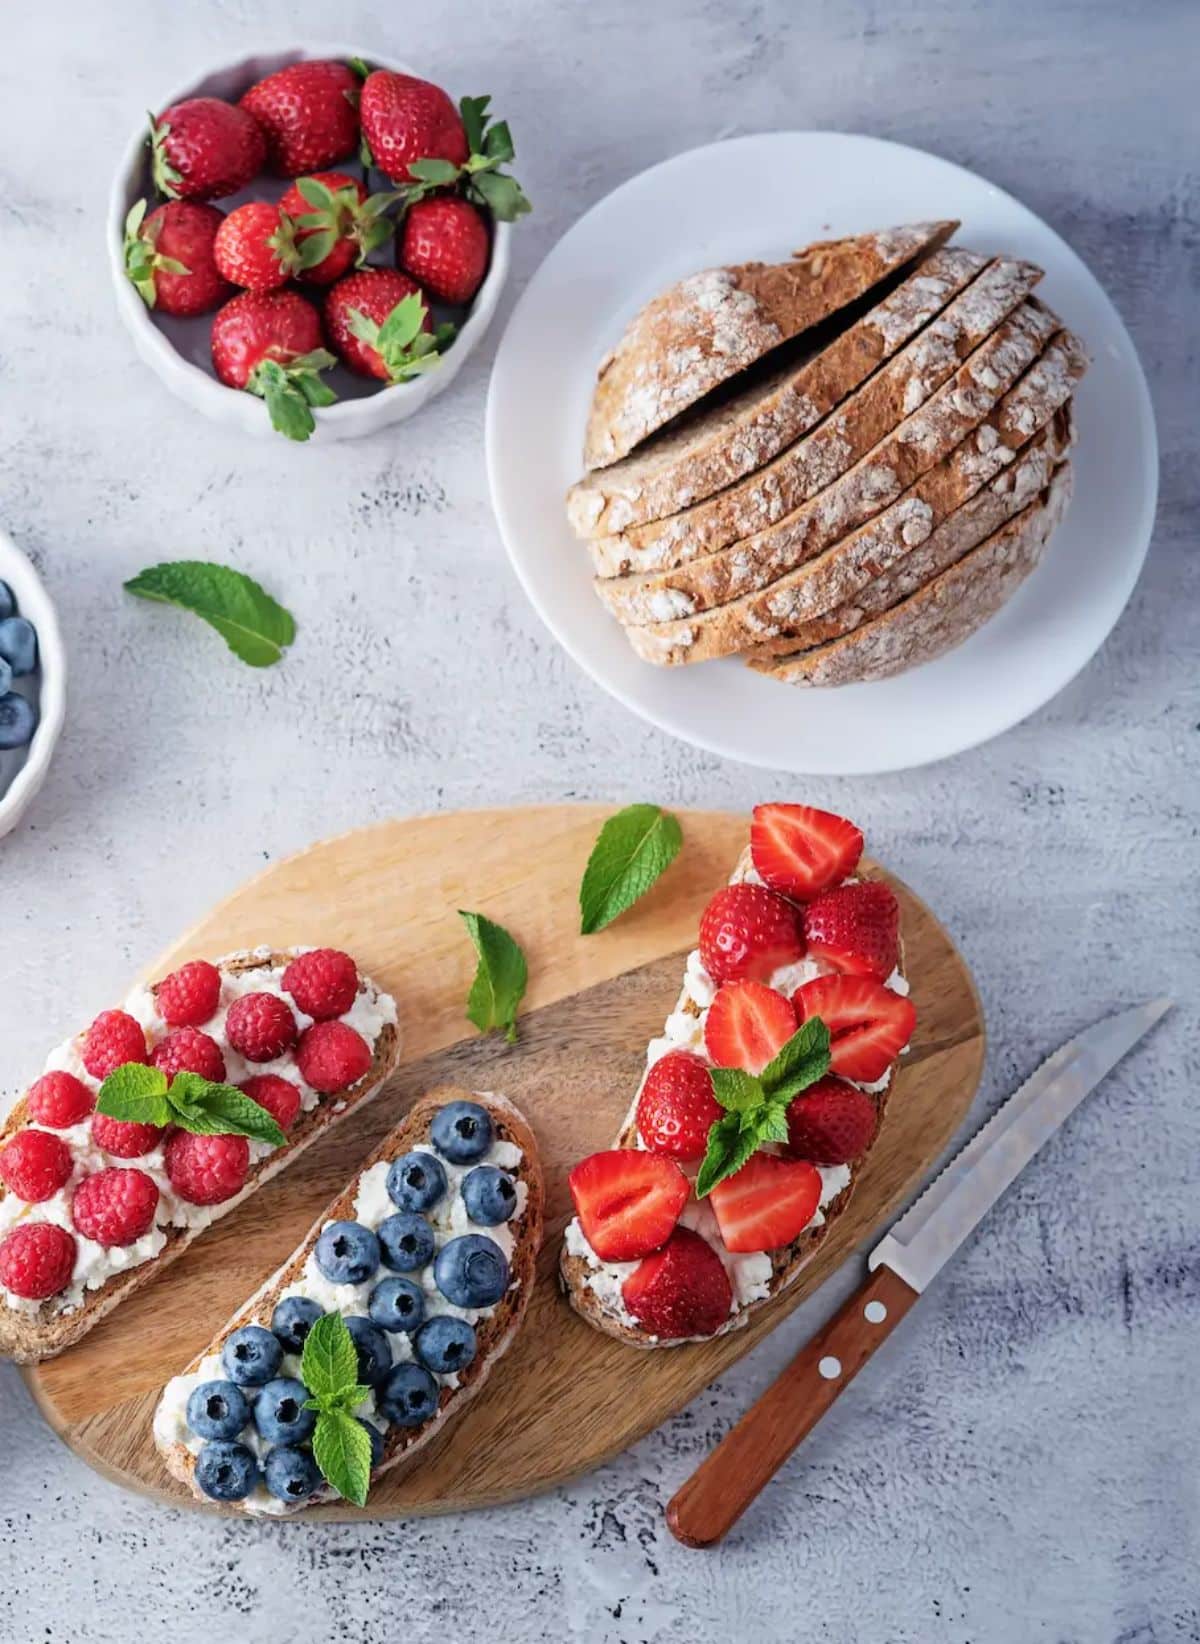 Cottage Cheese Toasts With Fruits on a wooden cutting board.